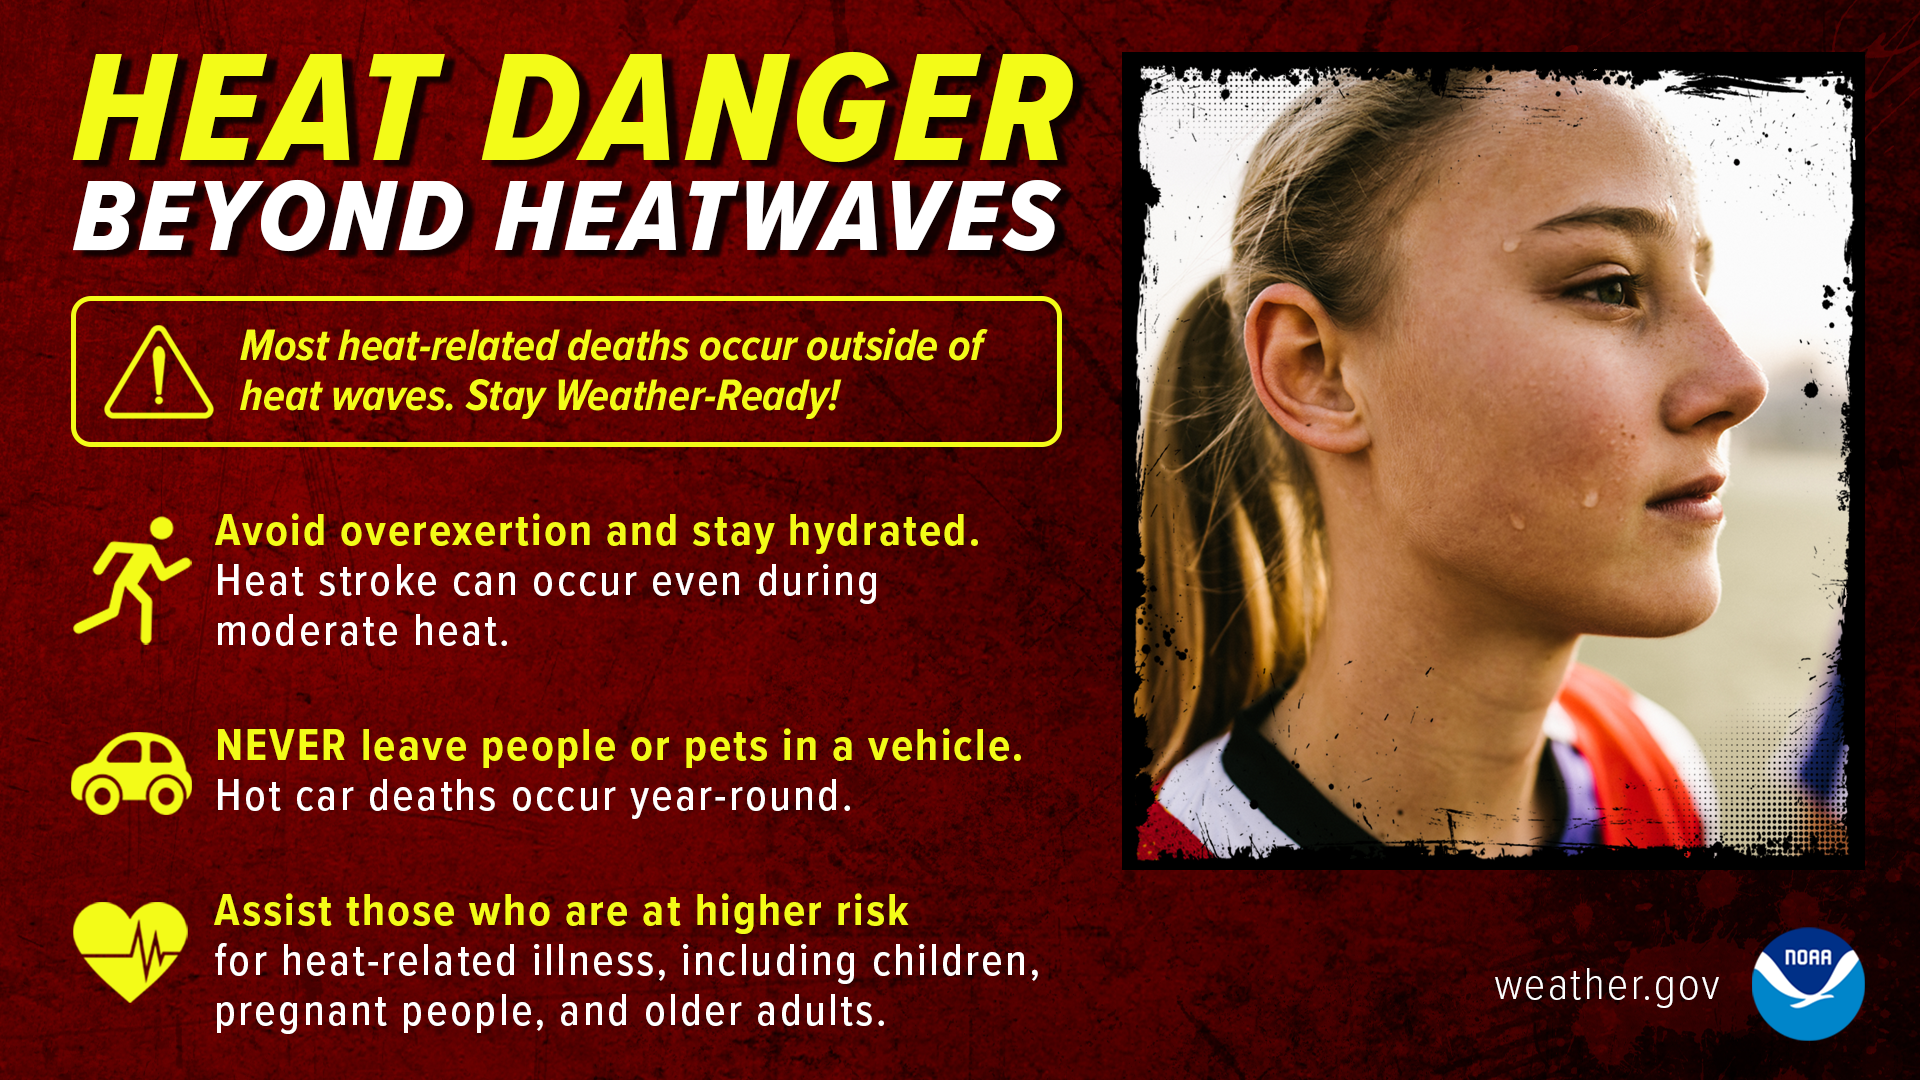 Heat Danger Beyond Heatwaves: most heat-related deaths occur outside of heat waves. Stay Weather-Ready! Avoid overexertion and stay hydrated. Heat stroke can occur even during moderate heat. Never leave people or pets in a vehicle. Hot car deaths occur year-round. Assistn those who are at higher risk for heat-related illness, including children, pregnant people, and other adults.